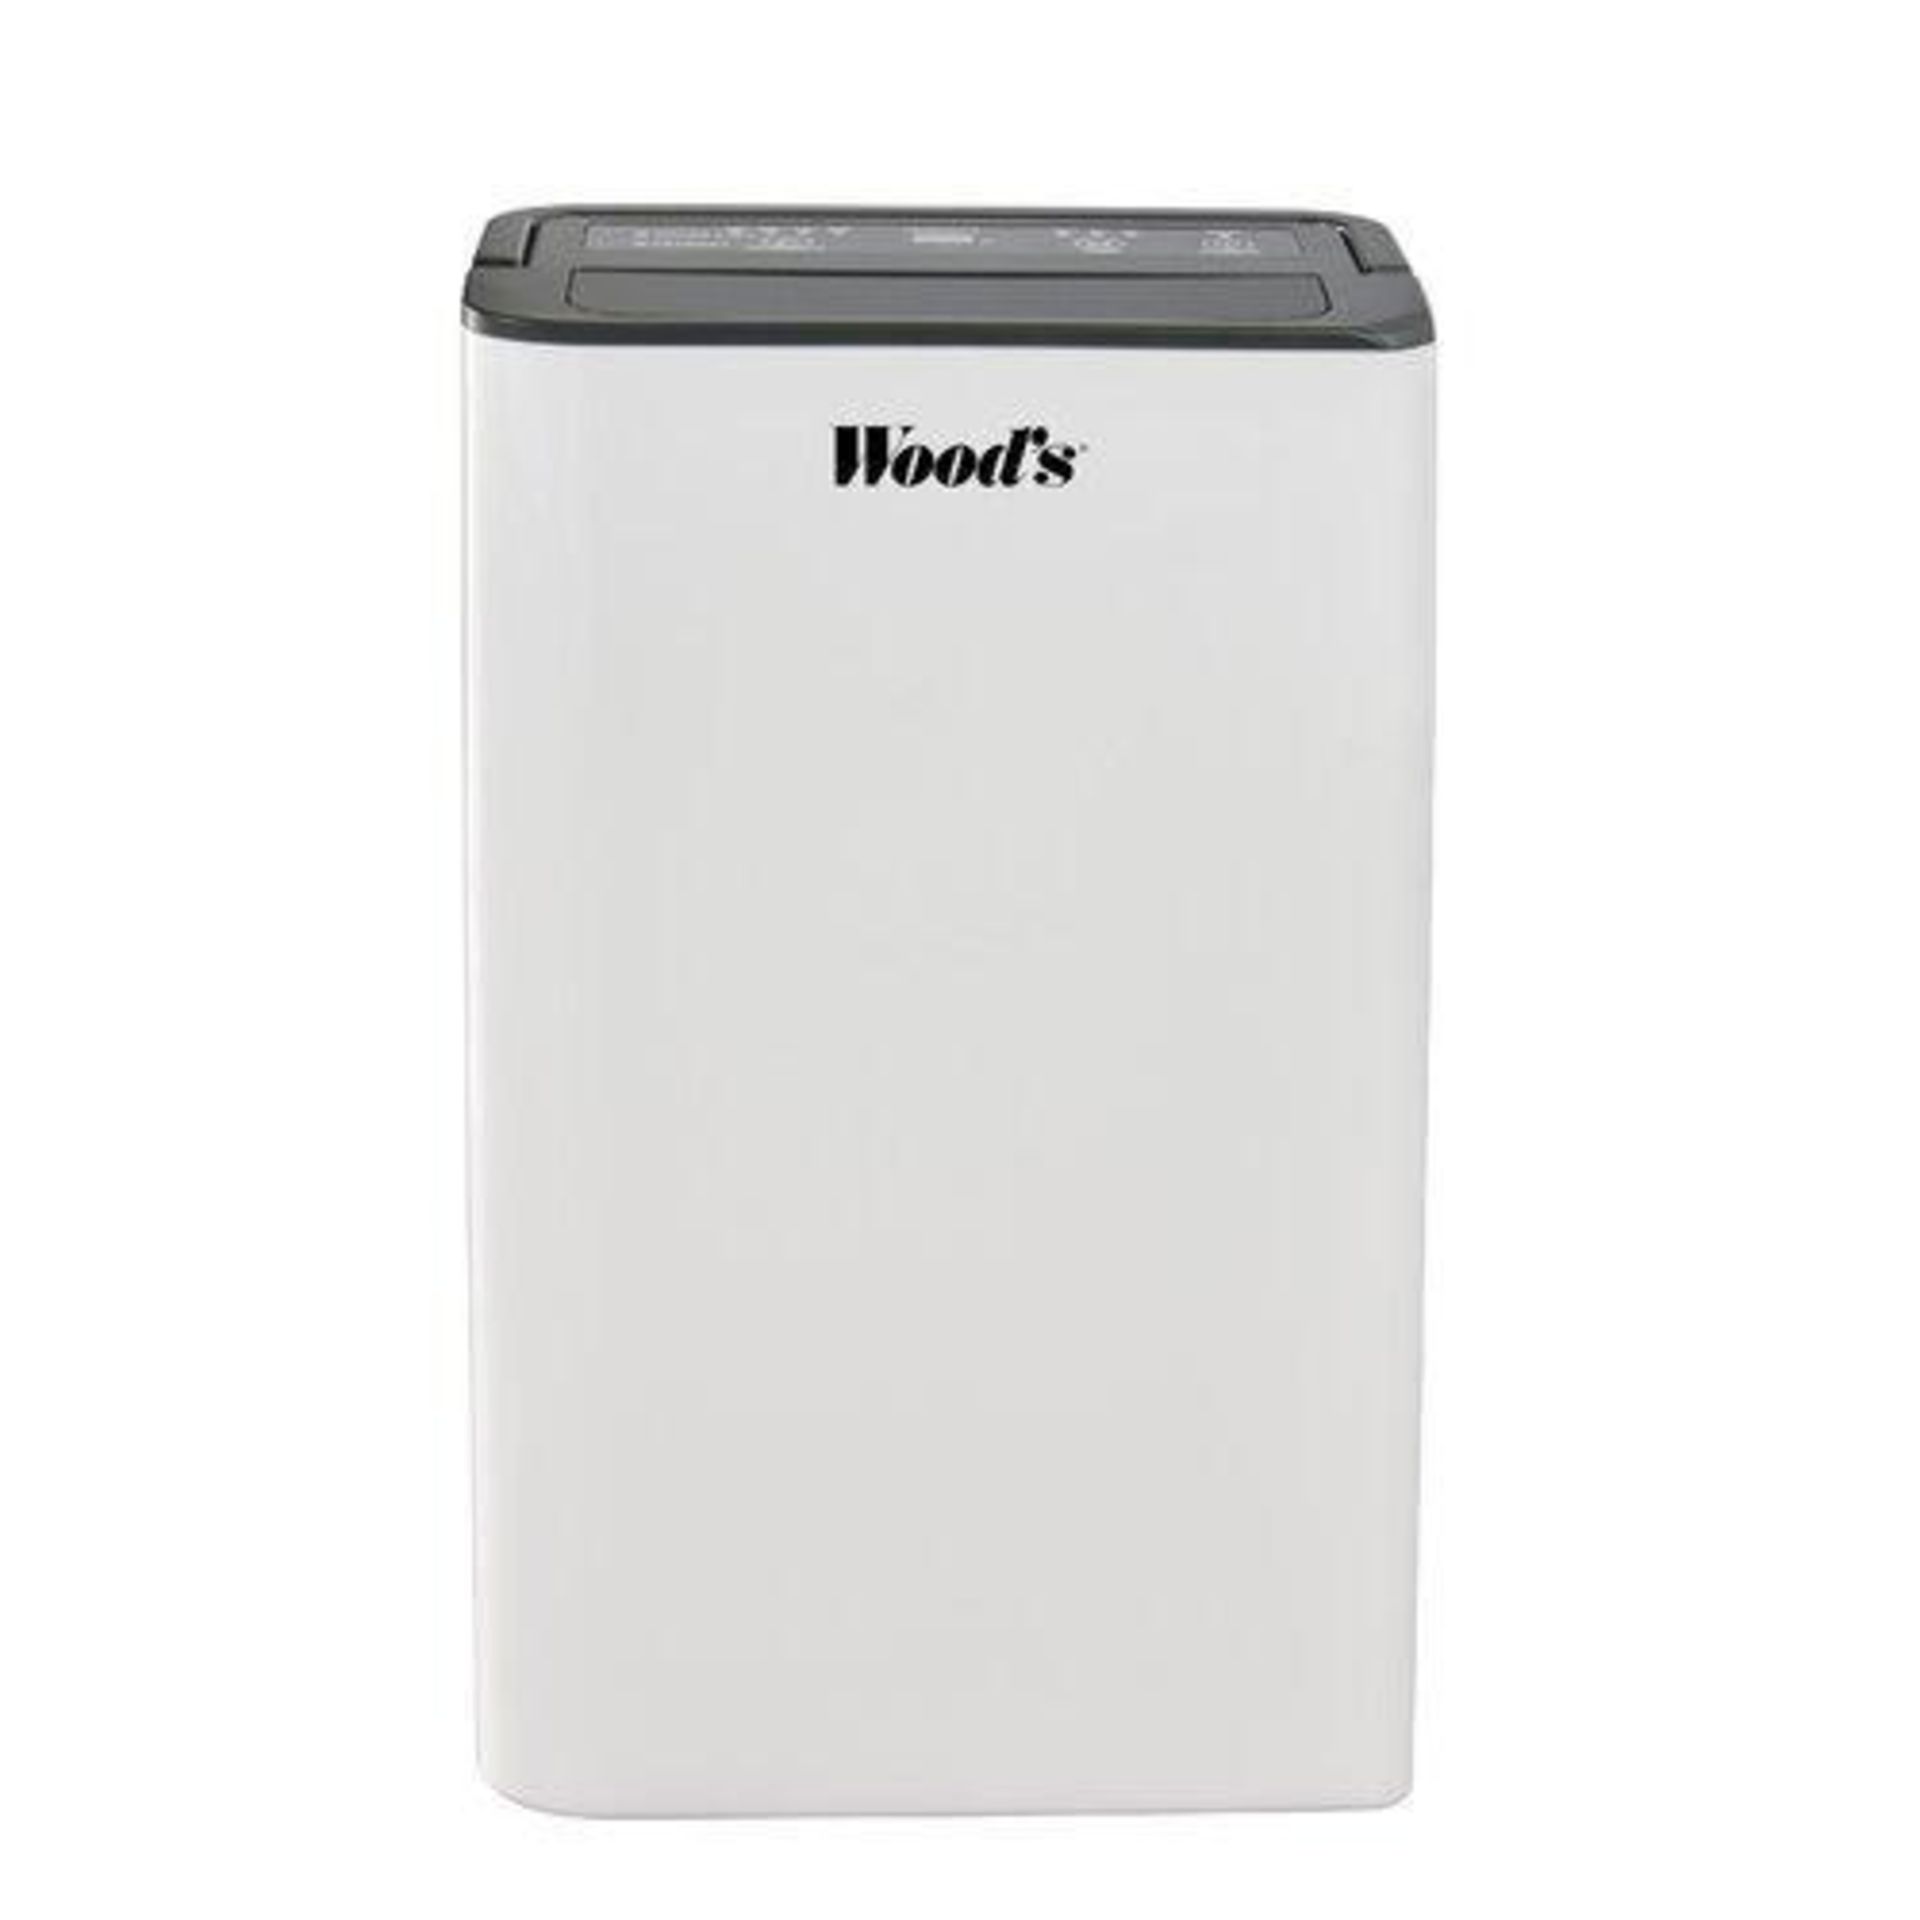 Woods MDK11 DeHumidifier- 10L (R48)Compact, smooth and easy to operate. the Woods MDK11 Dehumidifier